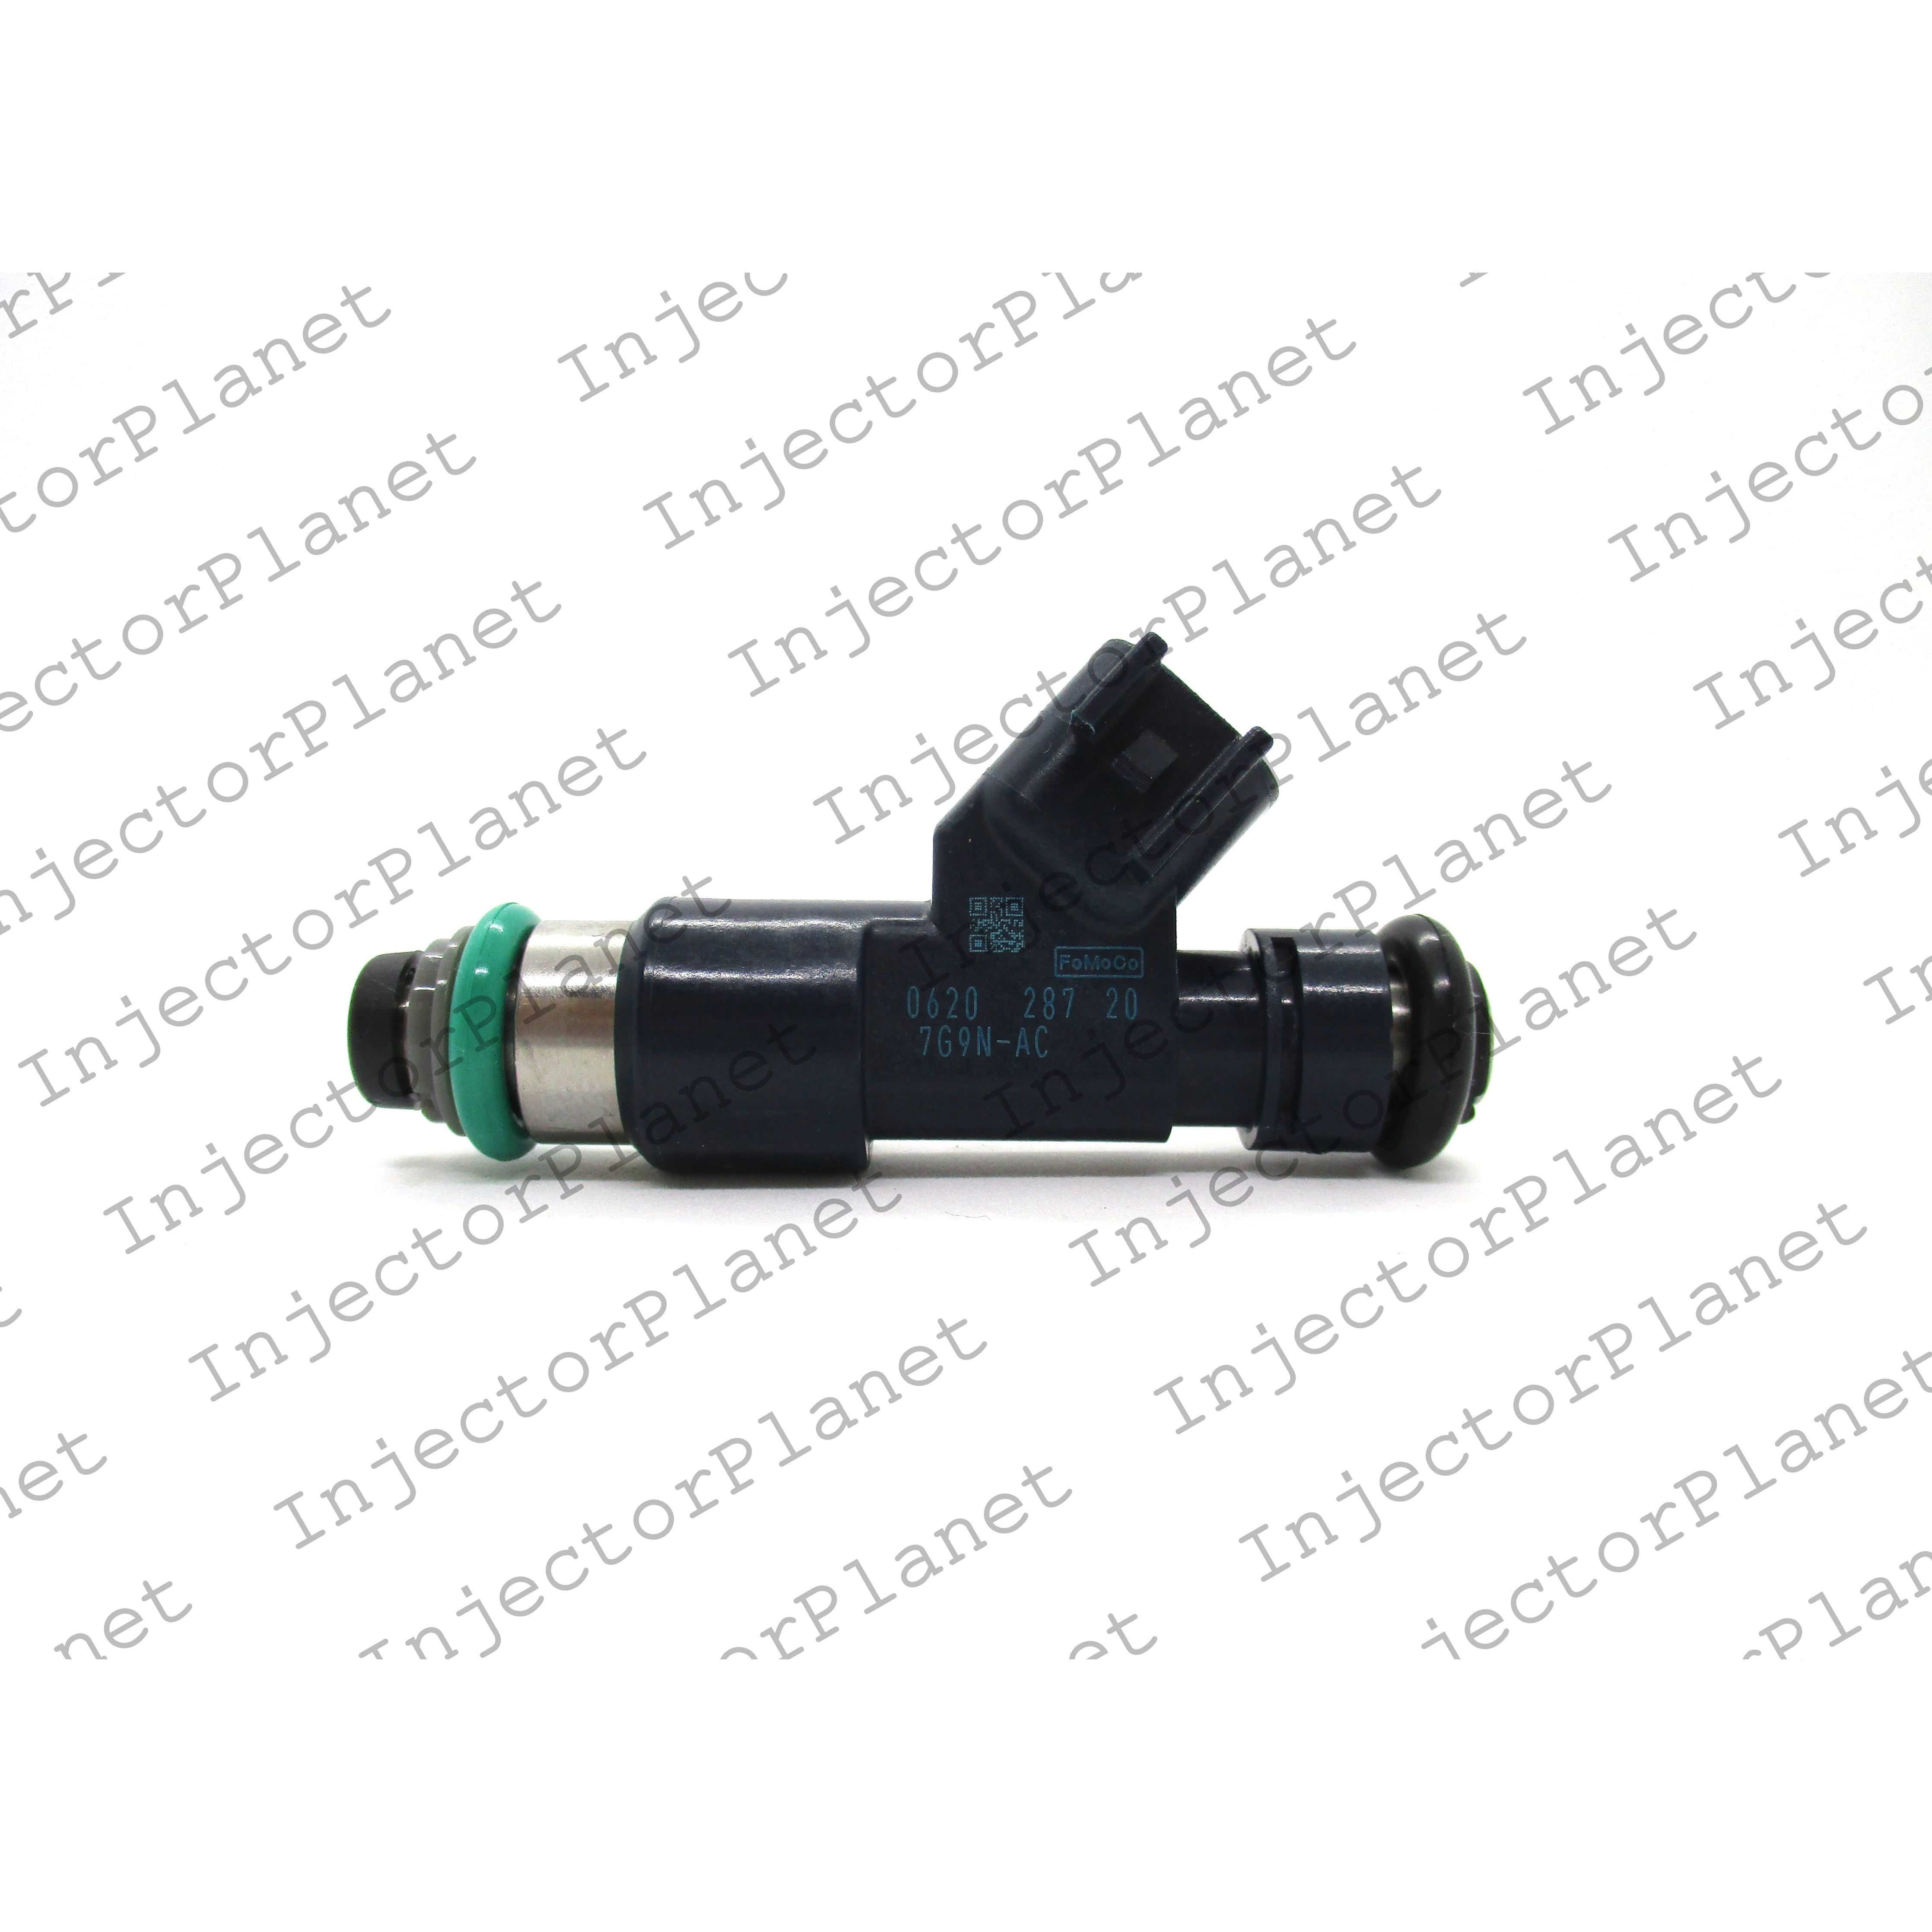 DENSO 297500-0620 / Volvo 7G9N-AC | INJECTOR PLANET CORP.